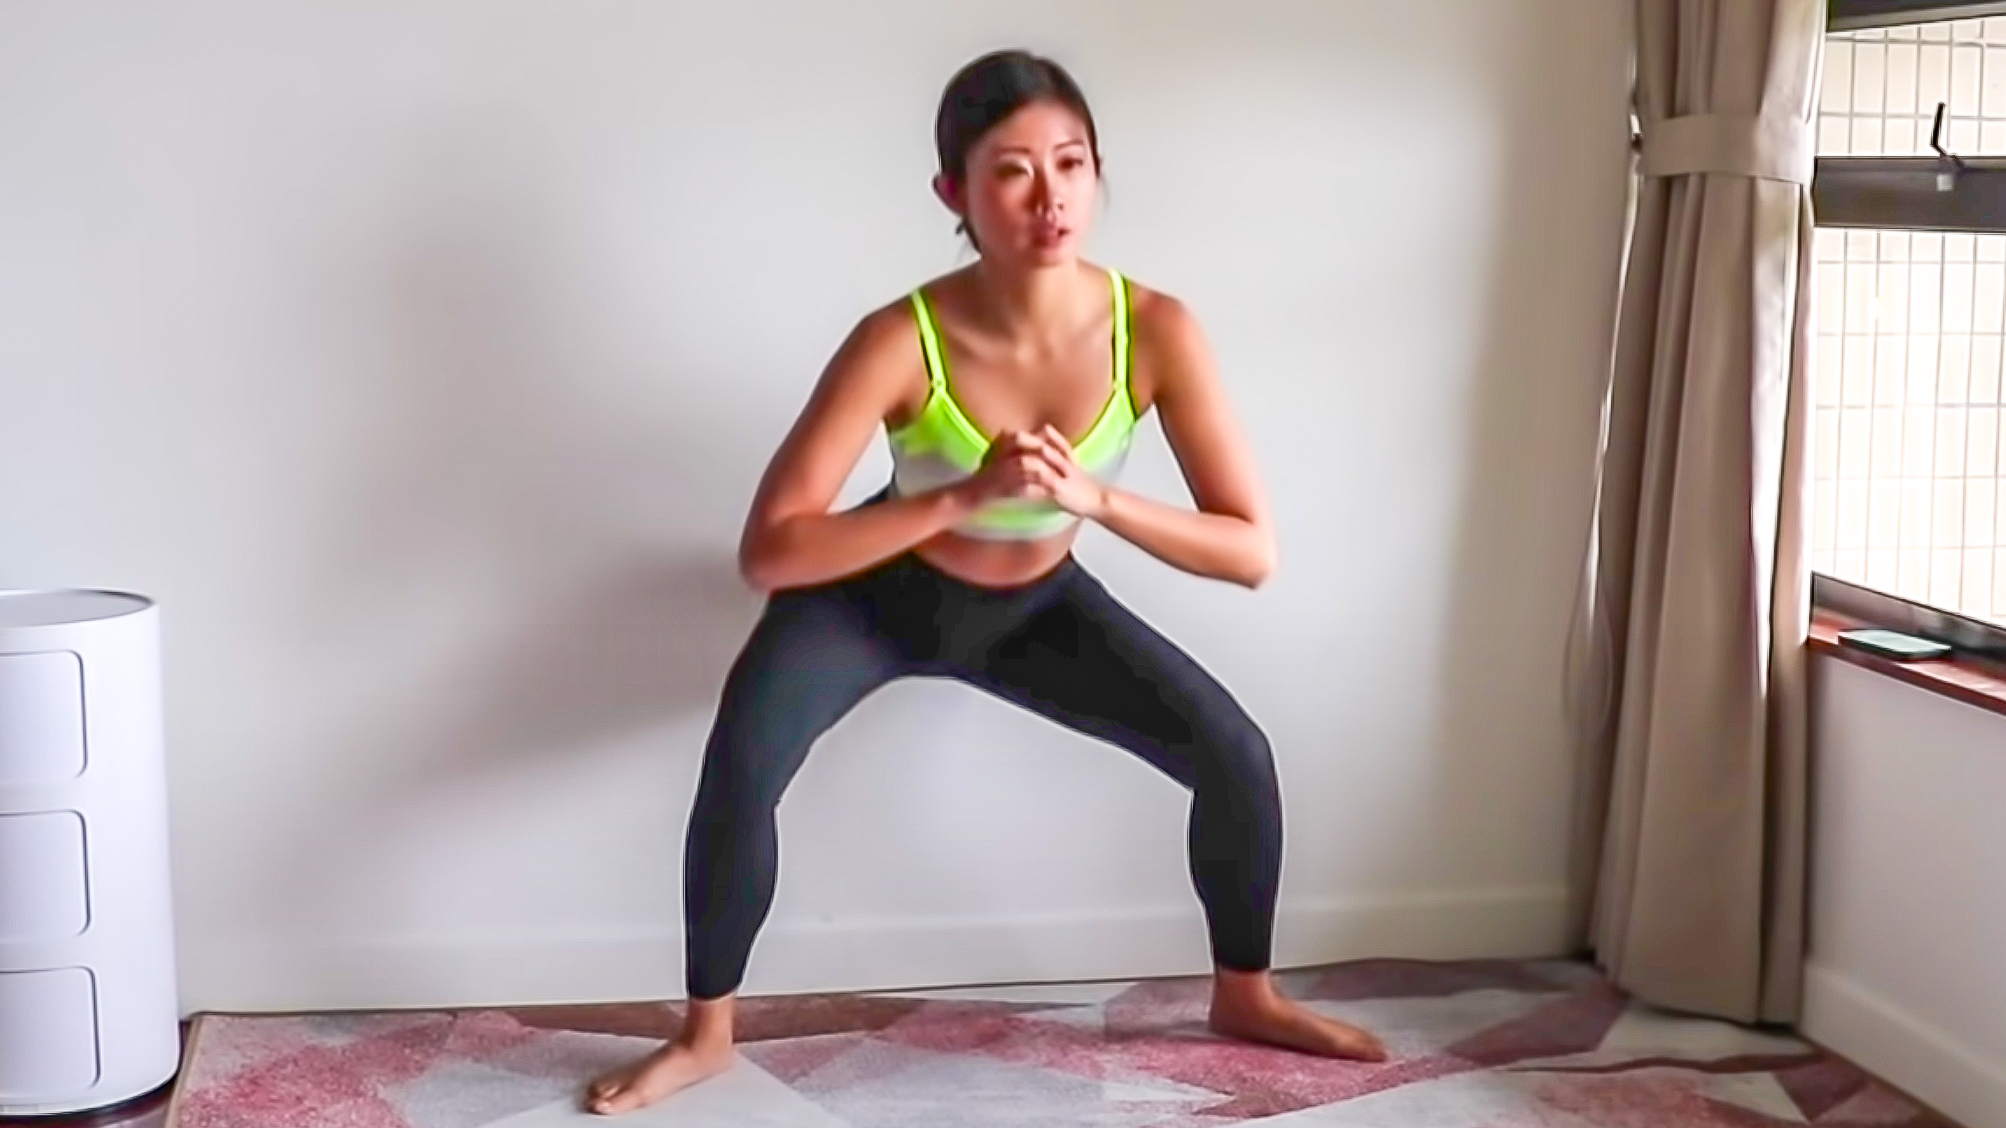 I tried the Emi Wong Slim Legs in 20 days workout — here's what happened